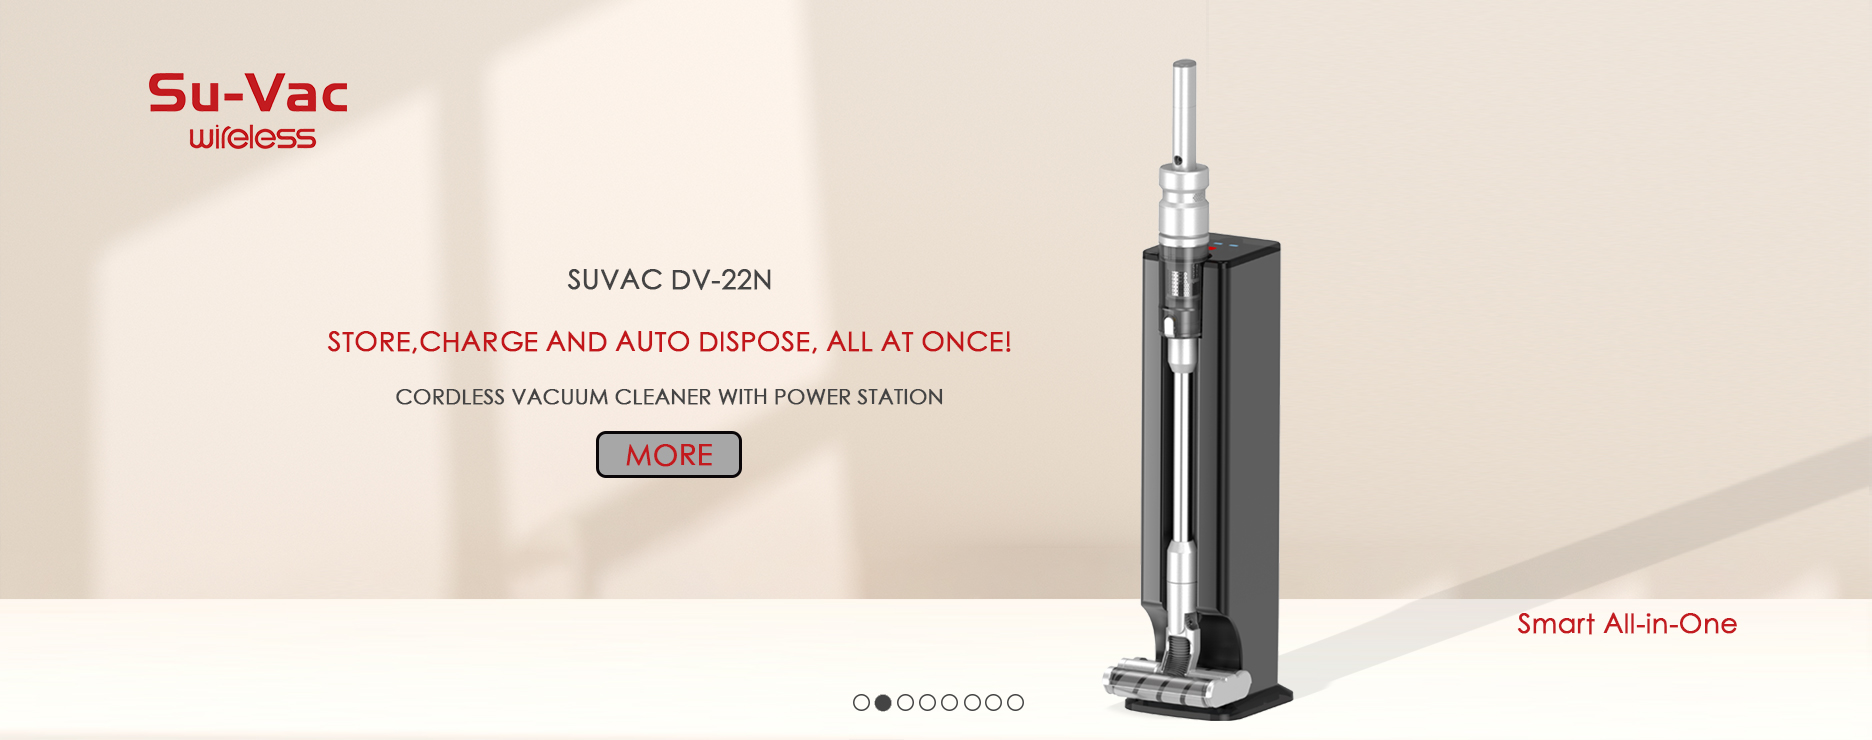 SUVAC DV22N SMART CORDLESS OMNI-GLIDE VACUUM CLEANER WITH ALL-IN-ONE CLEANING STATION